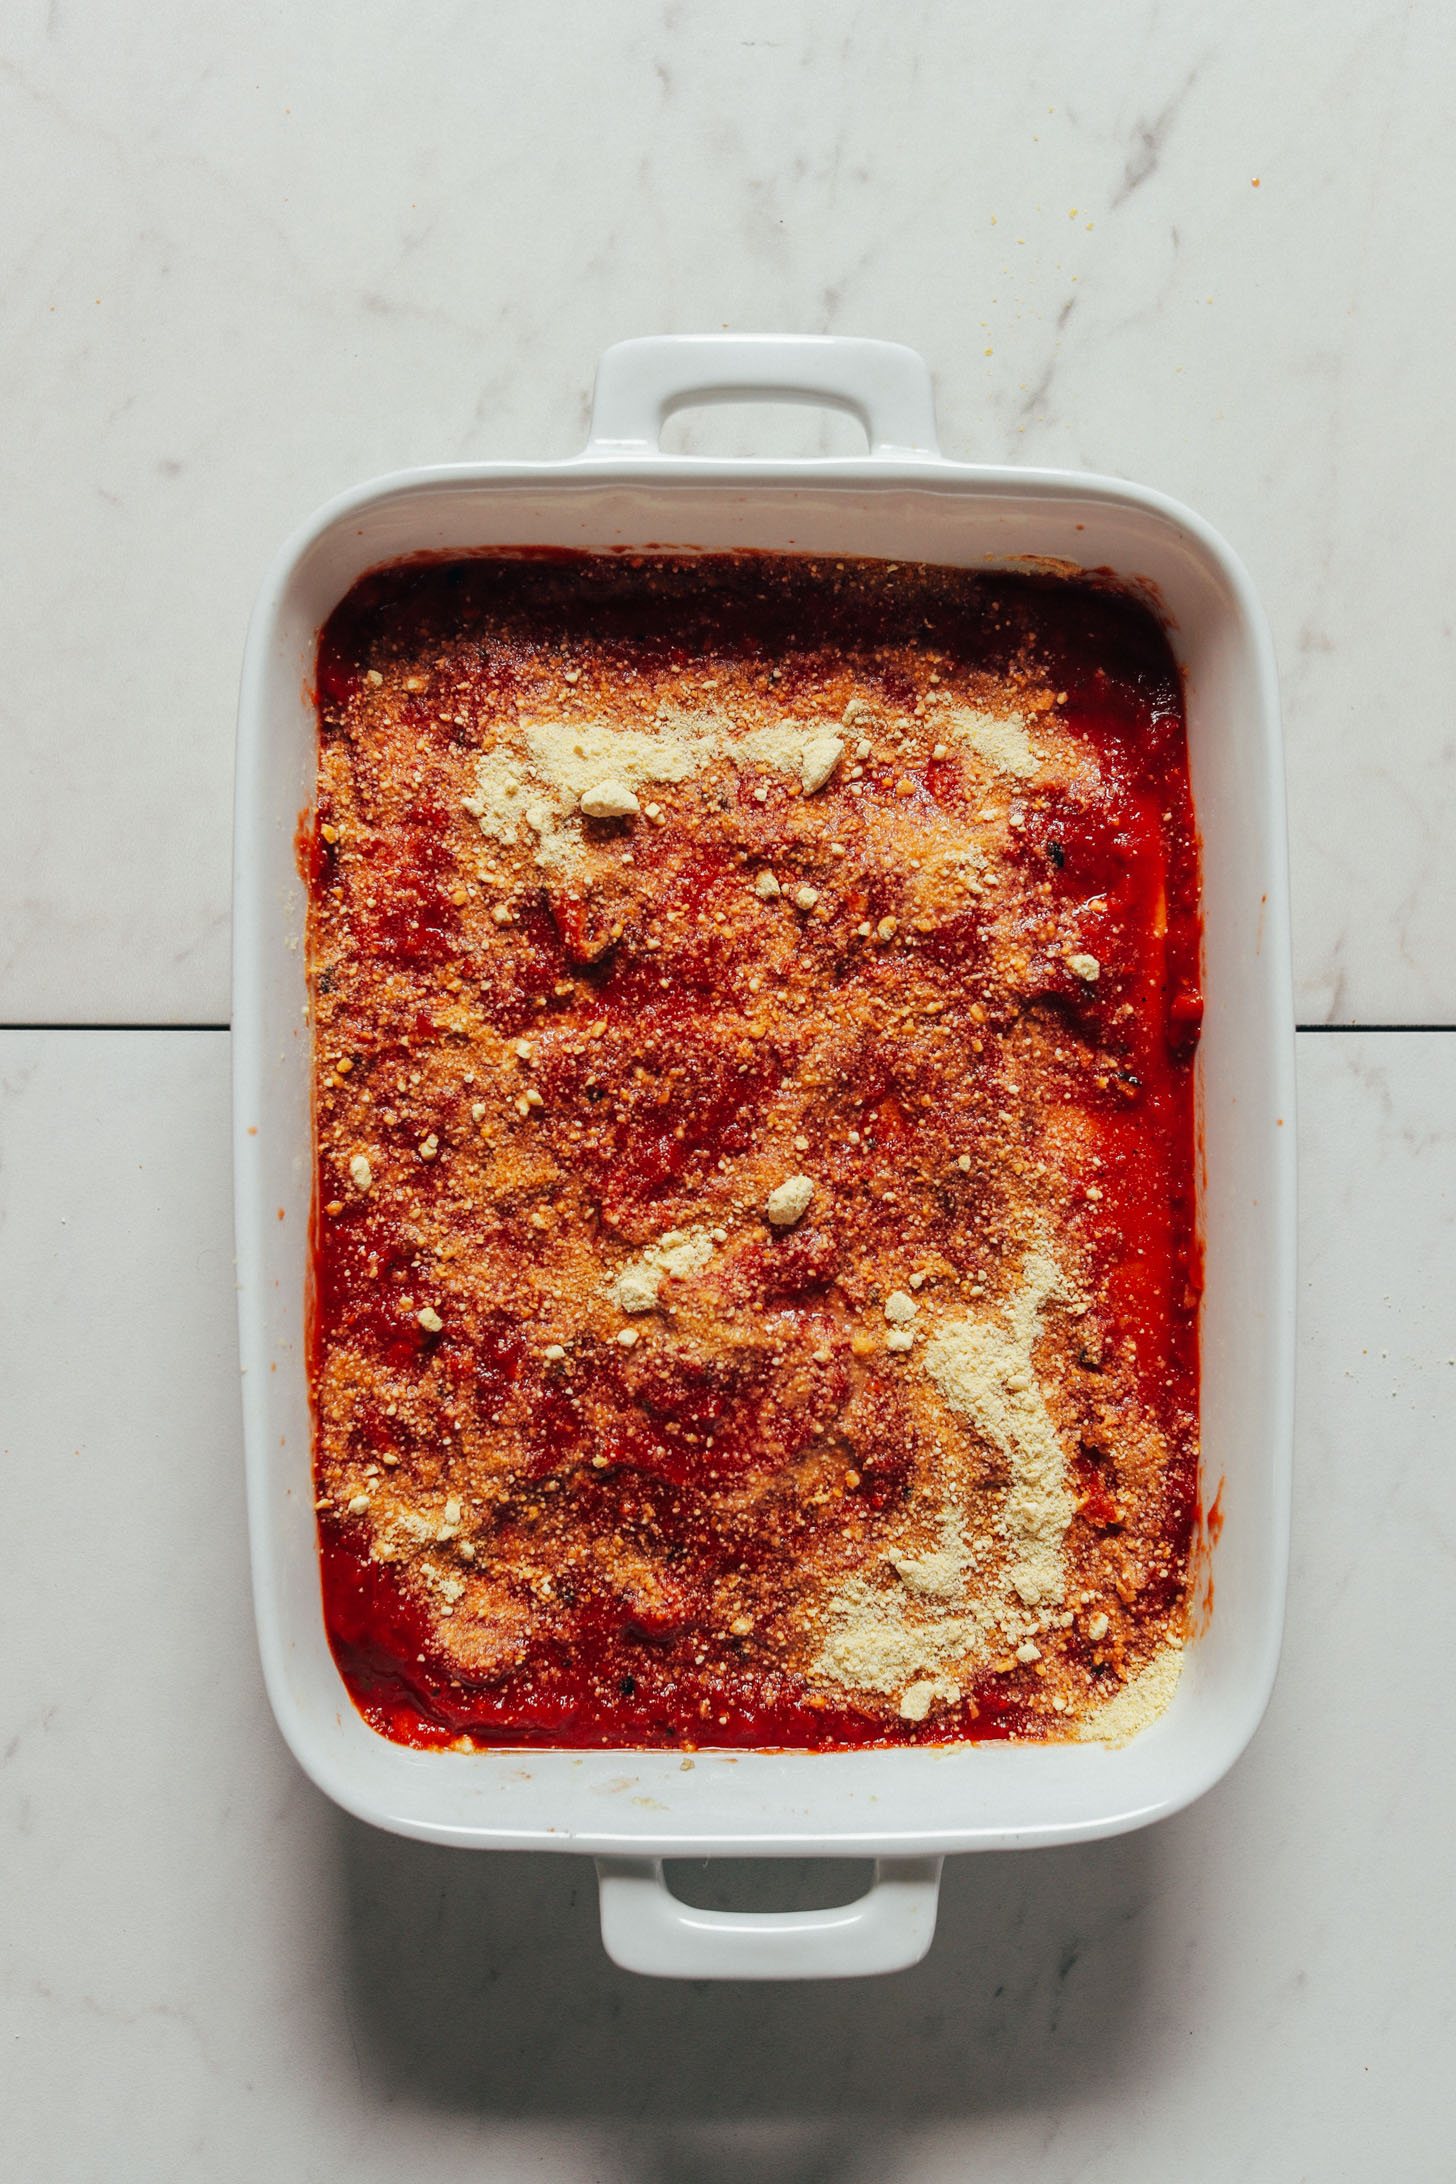 Ceramic baking pan filled with a batch of our Easy Vegan Lasagna topped with Vegan Parmesan